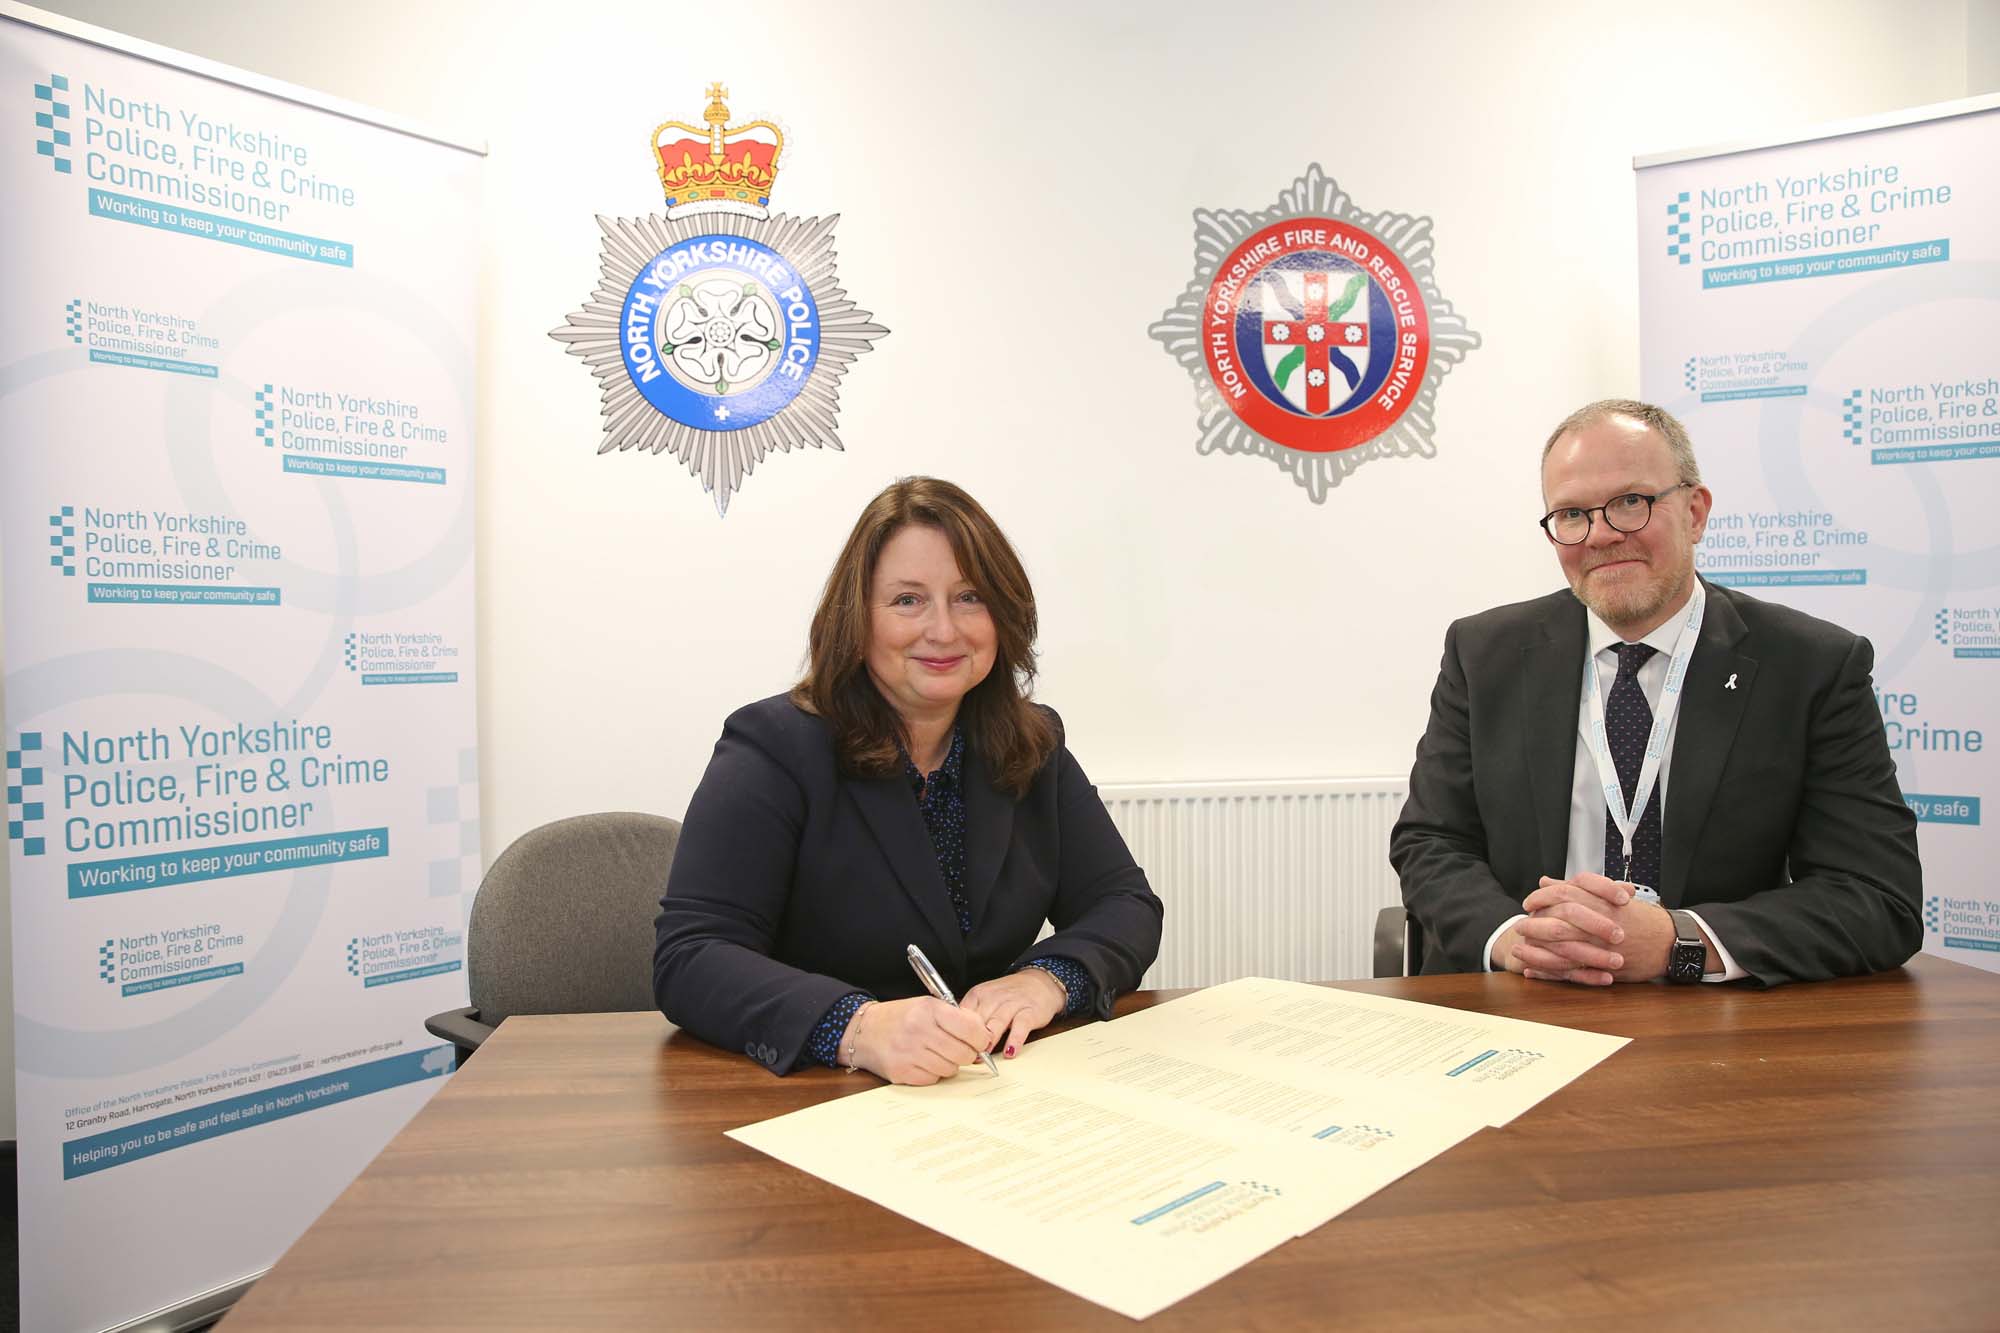 Zoë Estelle Appleton-Metcalfe signing her ethical declaration, witnessed by Simon James Antony Dennis, Chief Executive and Monitoring Officer on 29 November 2021.